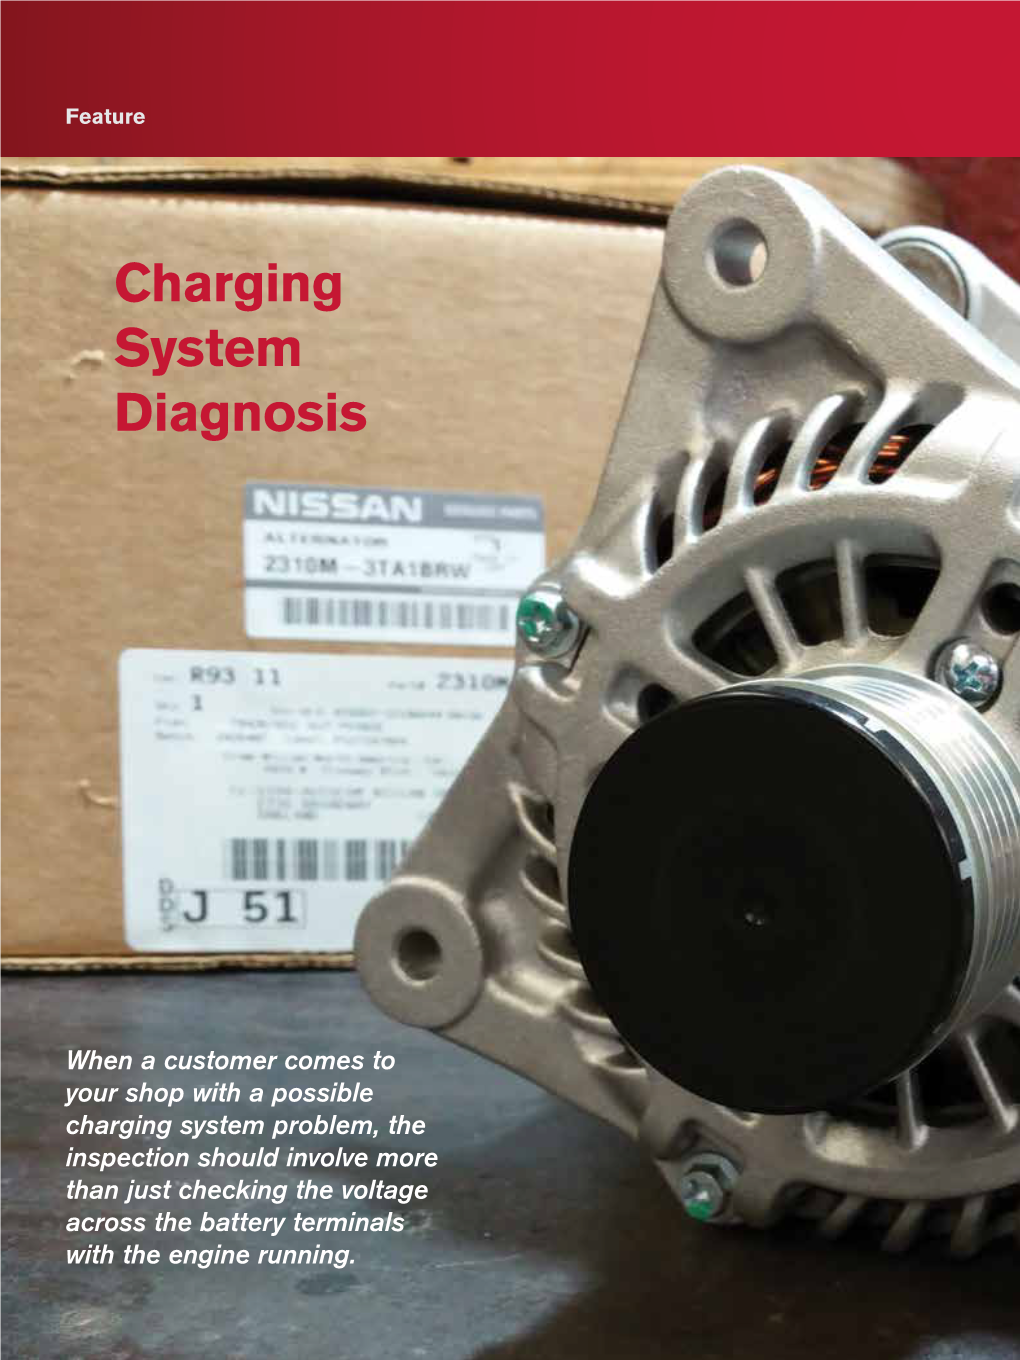 Nissan Charging Systems Diagnosis